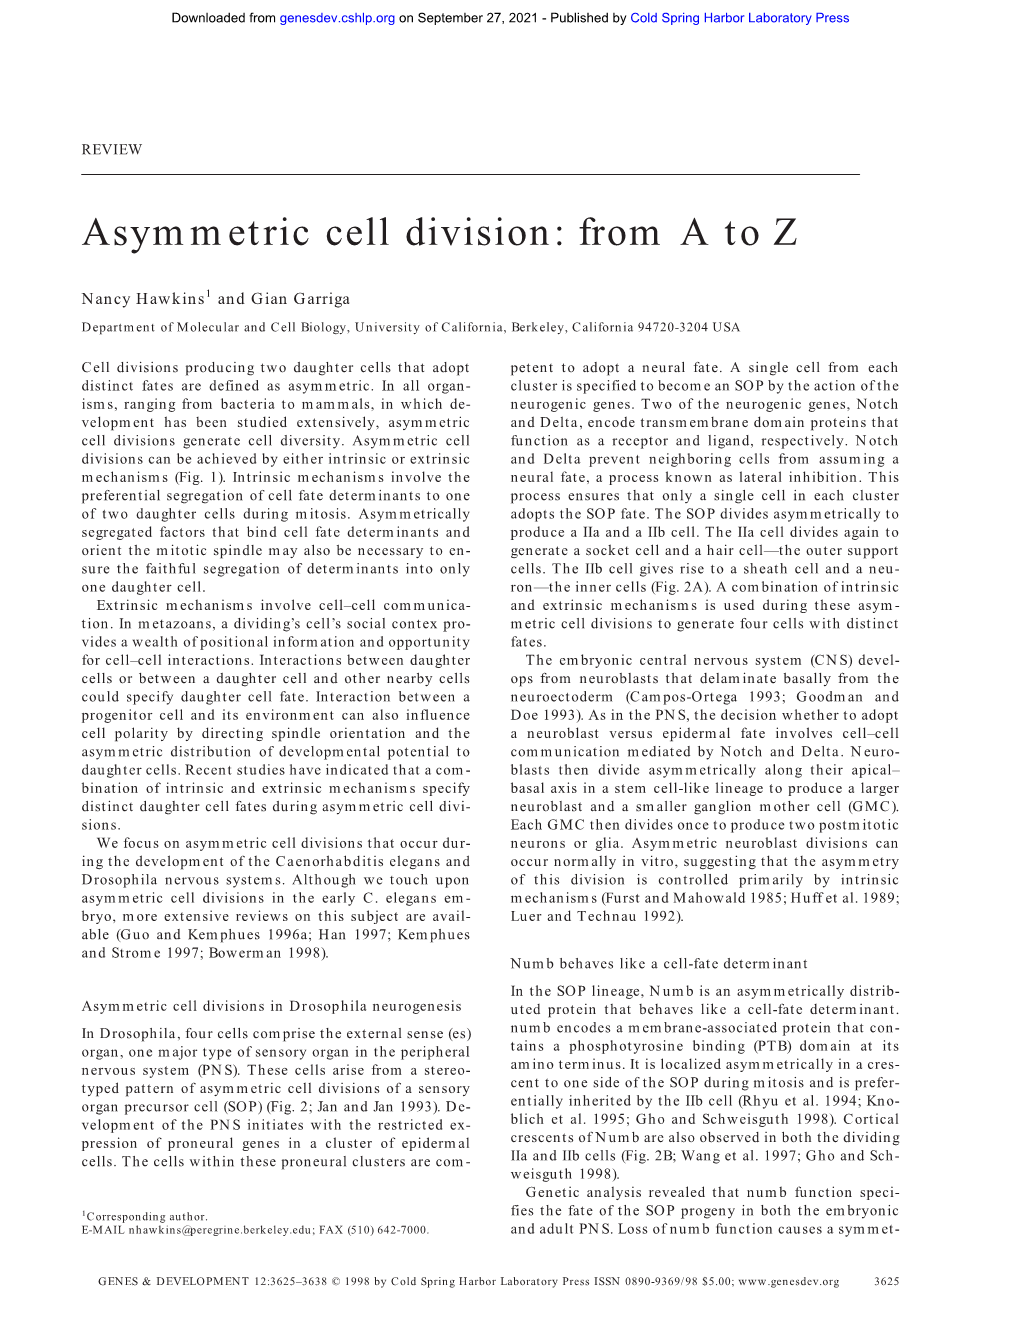 Asymmetric Cell Division: from a to Z